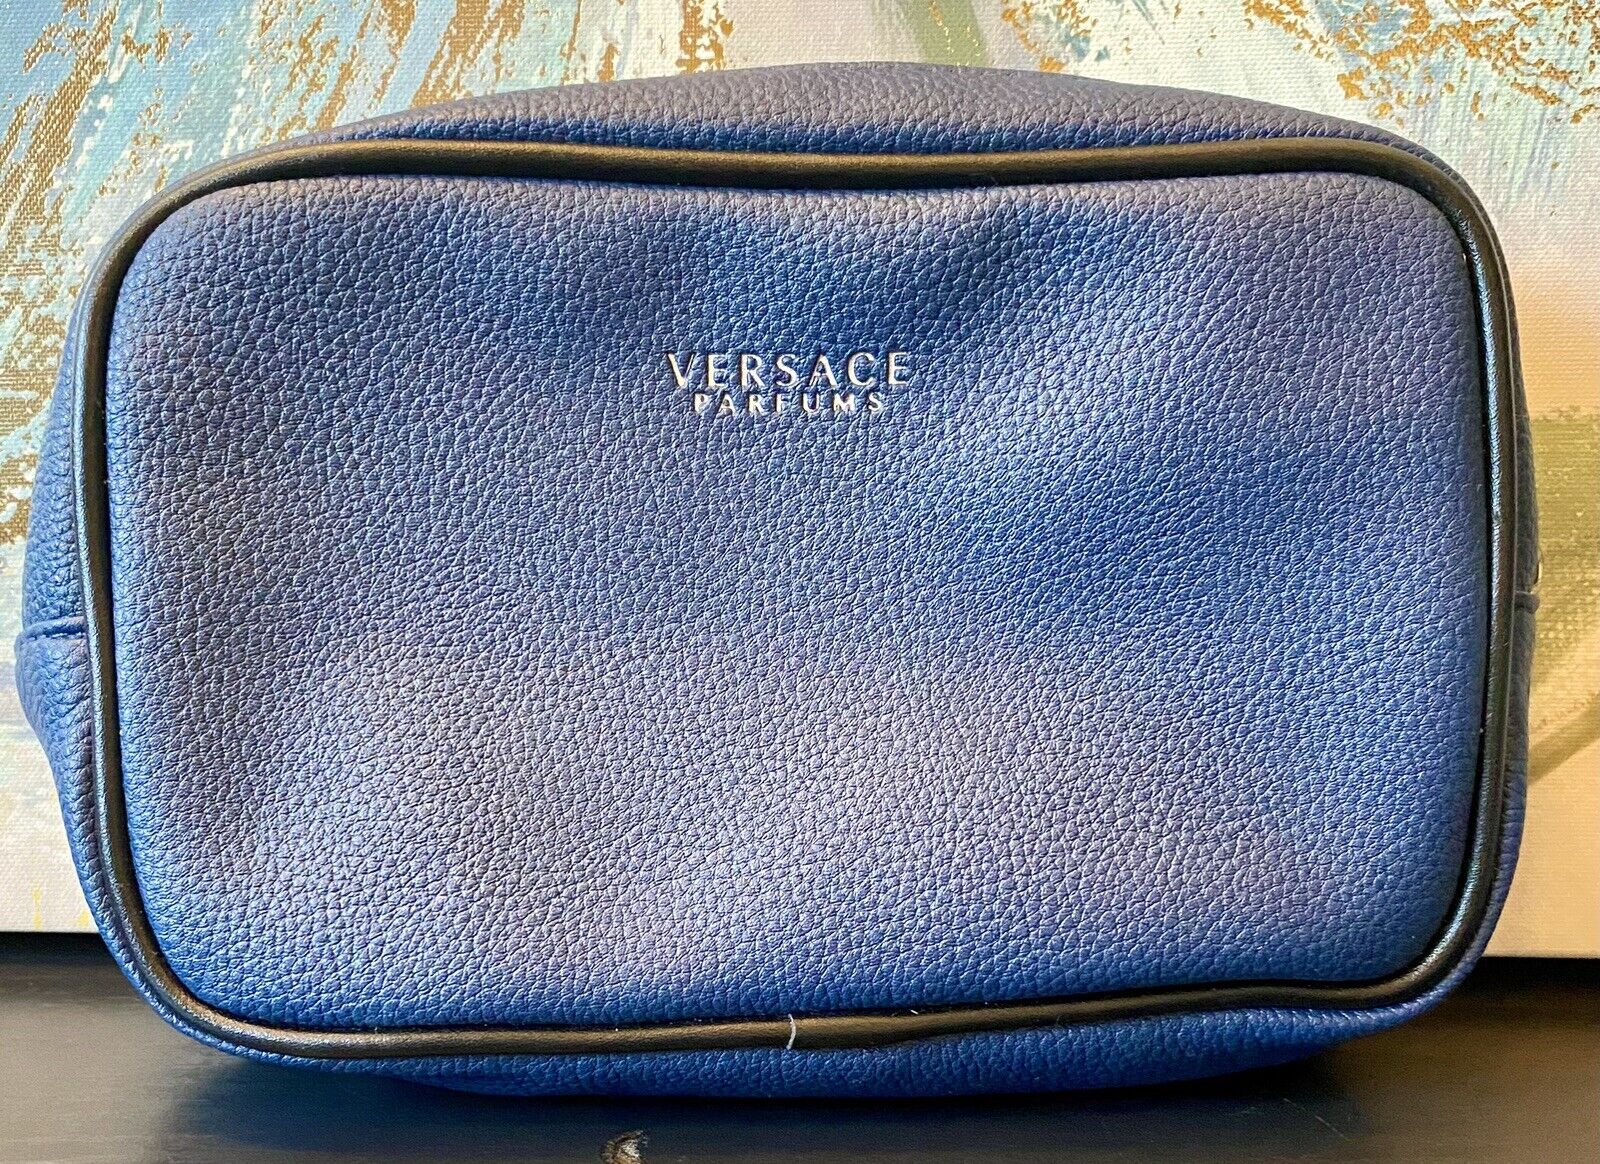  VERSACE Turkish Airlines business class exclusive amenity kit